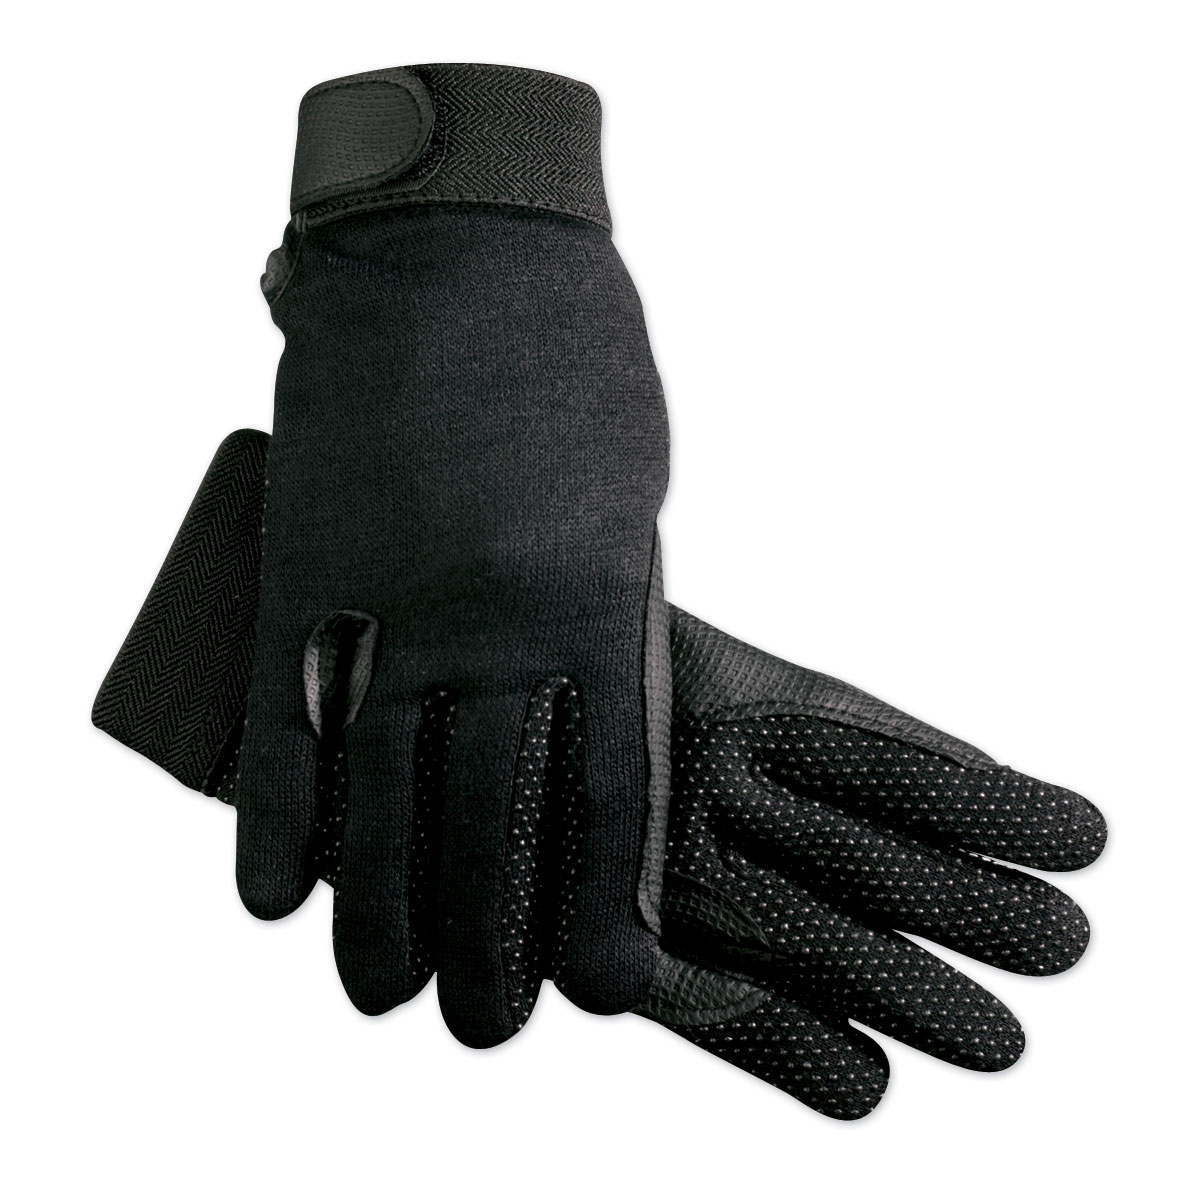 SSG All Weather Winter Lined Riding Gloves 